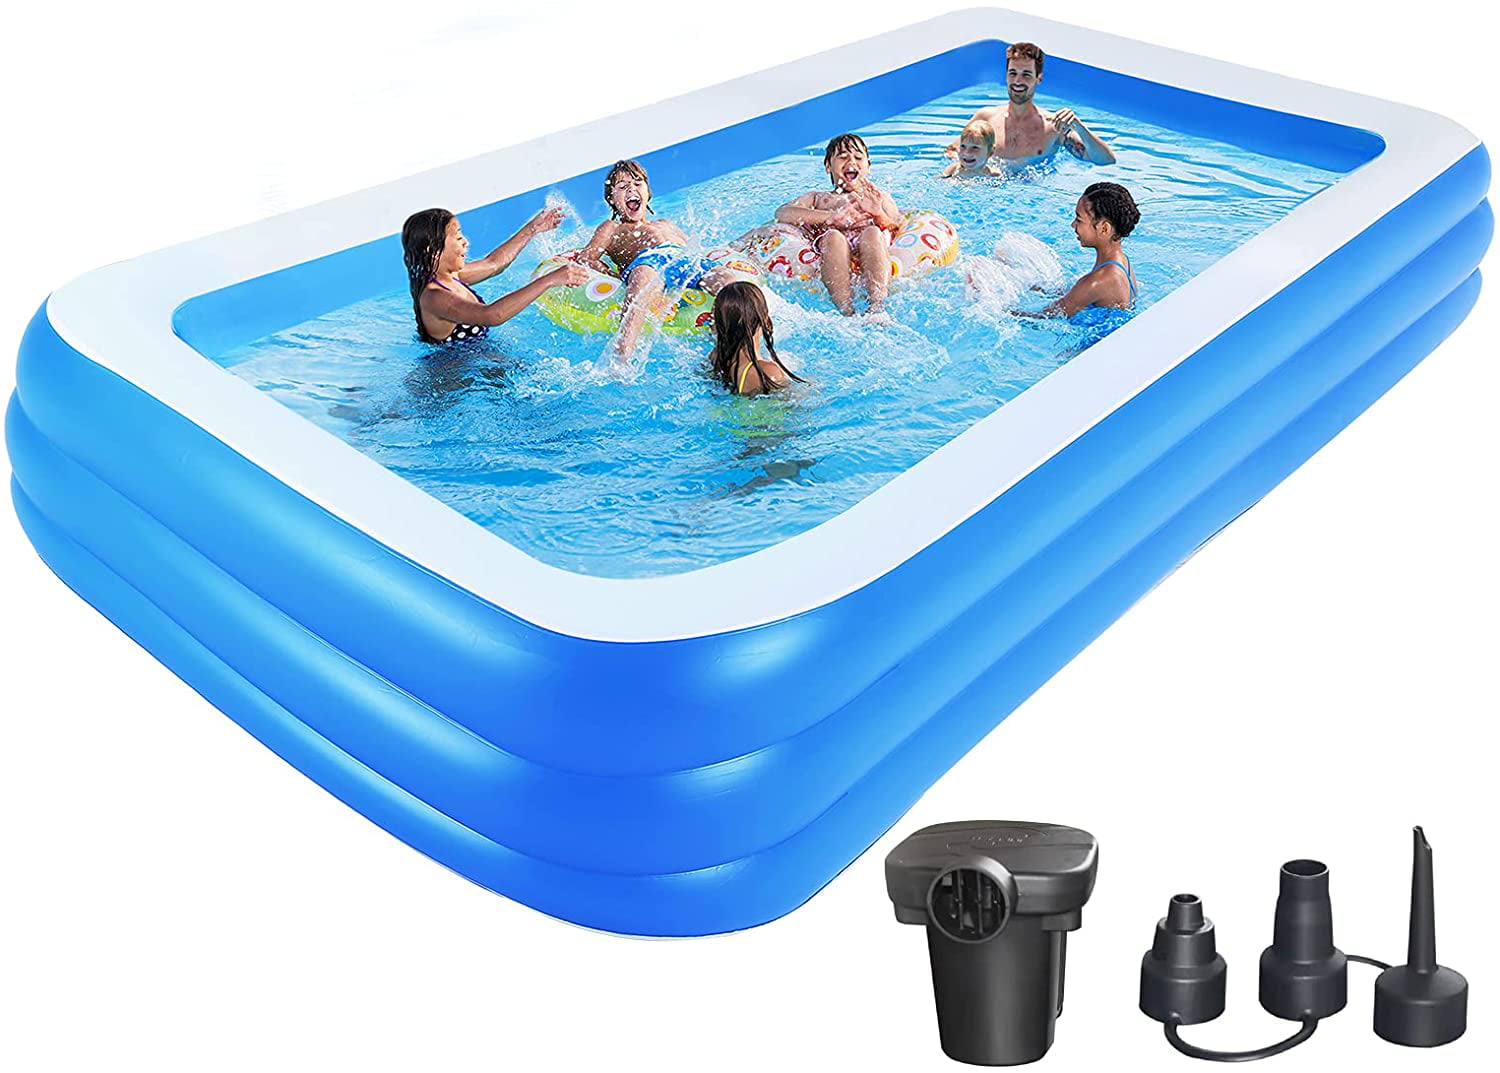 Nflatable Swimming Pool Extra Large 142x75x22 Inches Full Sized Inflatable Pool Blow Up Pool For Adults Kids Rectangle Above Ground Pool For Backyard Garden Outdoor Electric Pump Added Walmart Com Walmart Com